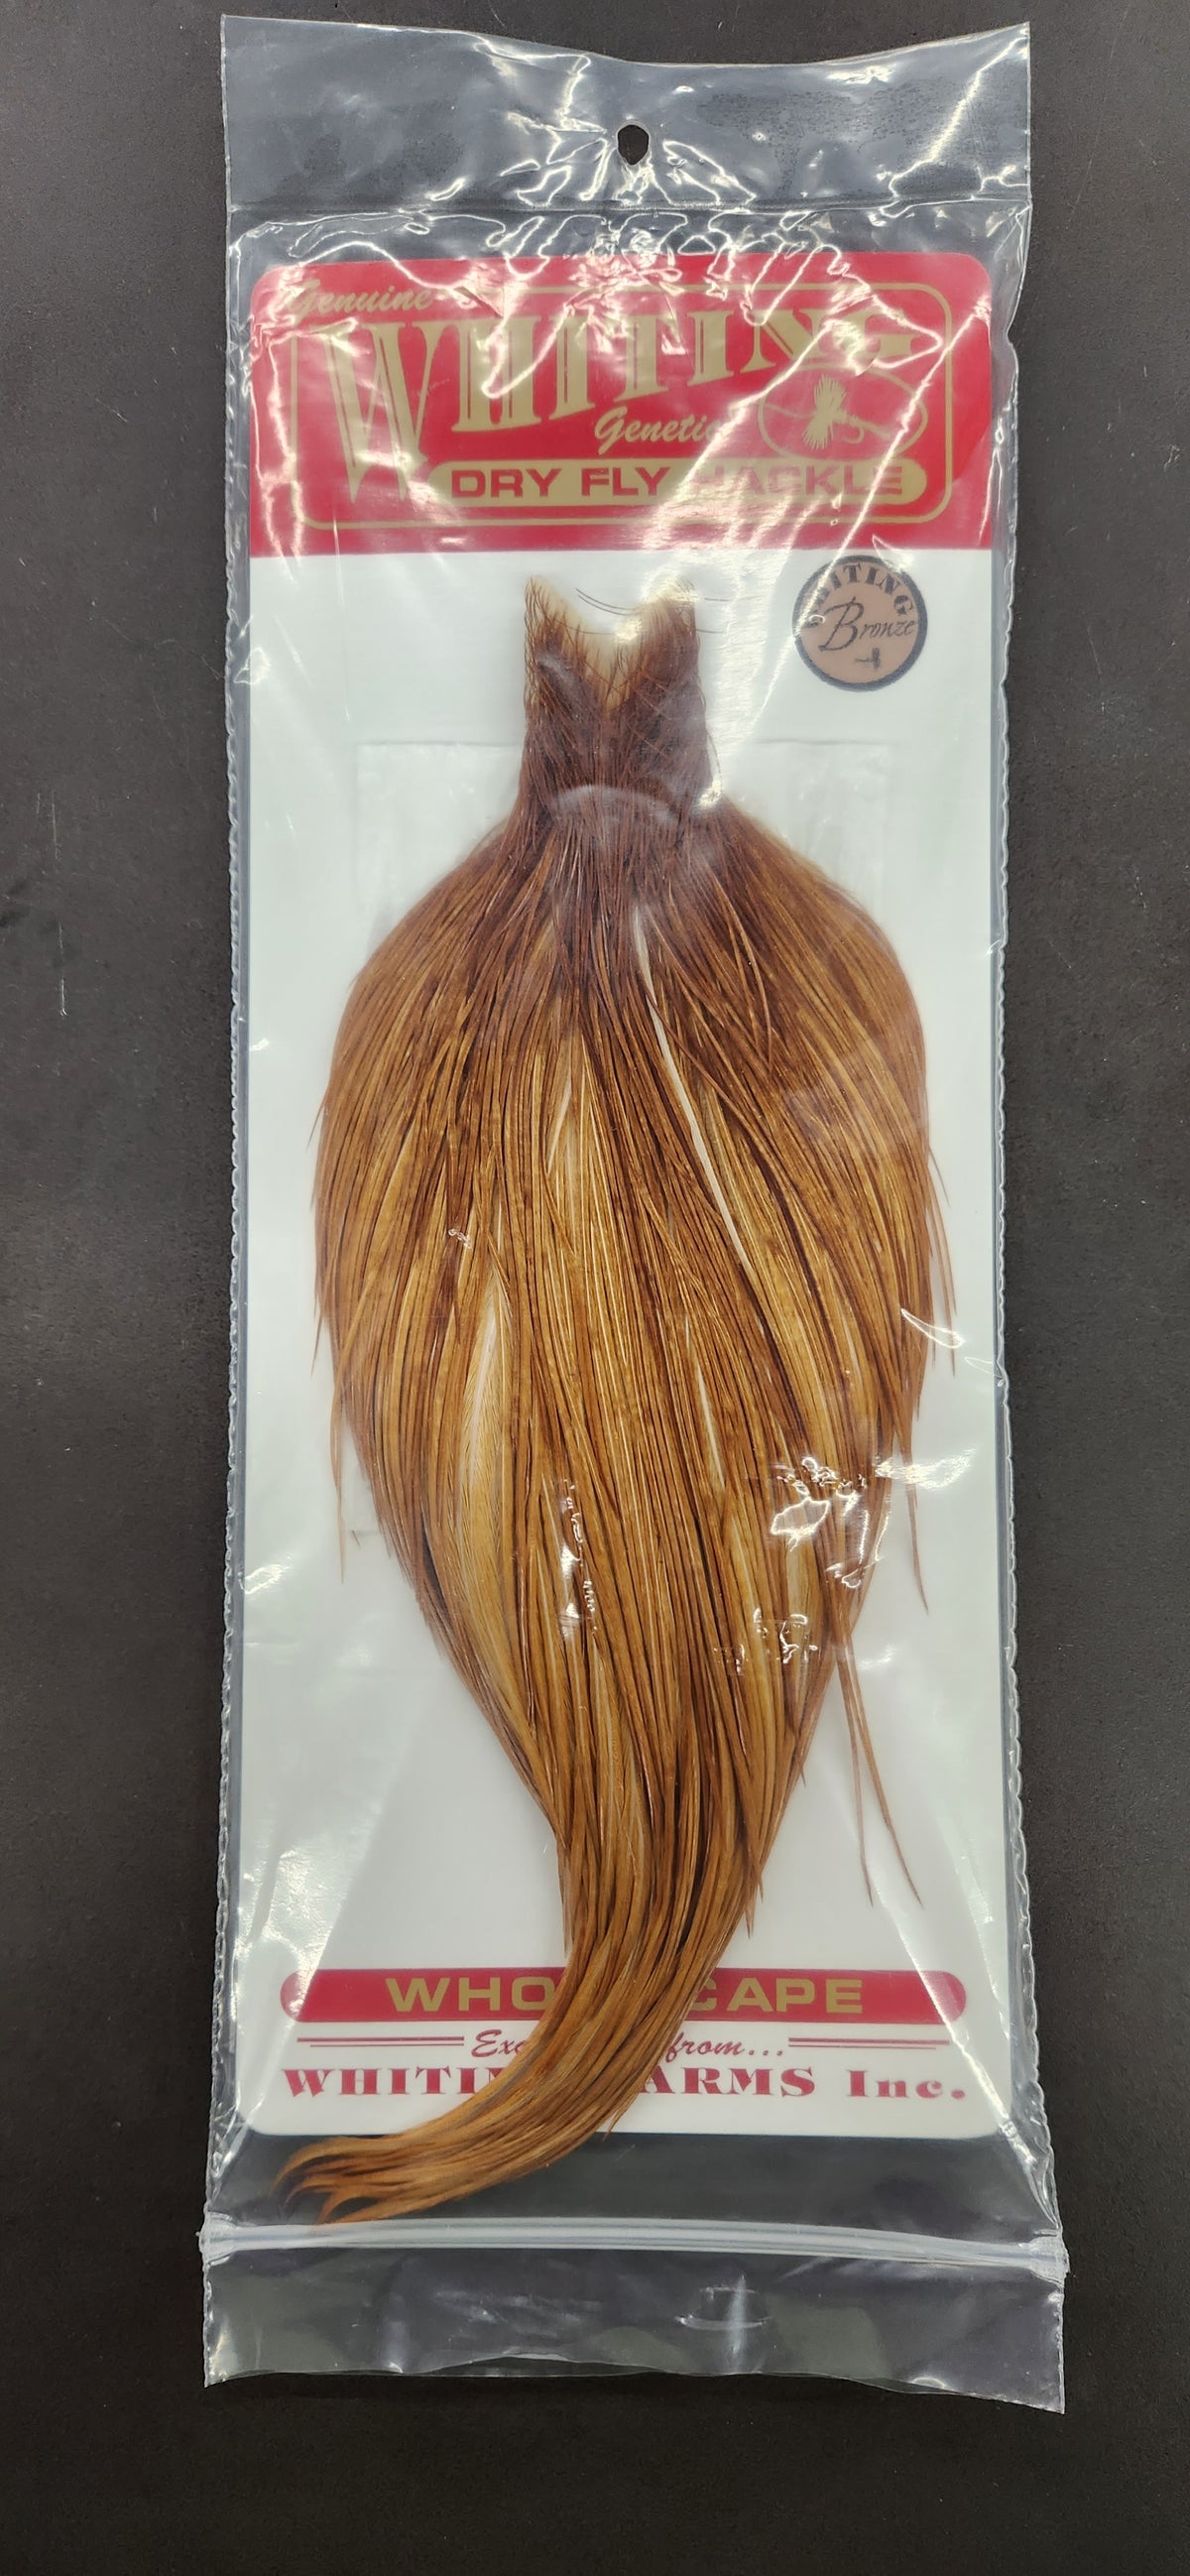 Whiting Rooster Bronze Full Dry Fly Cape